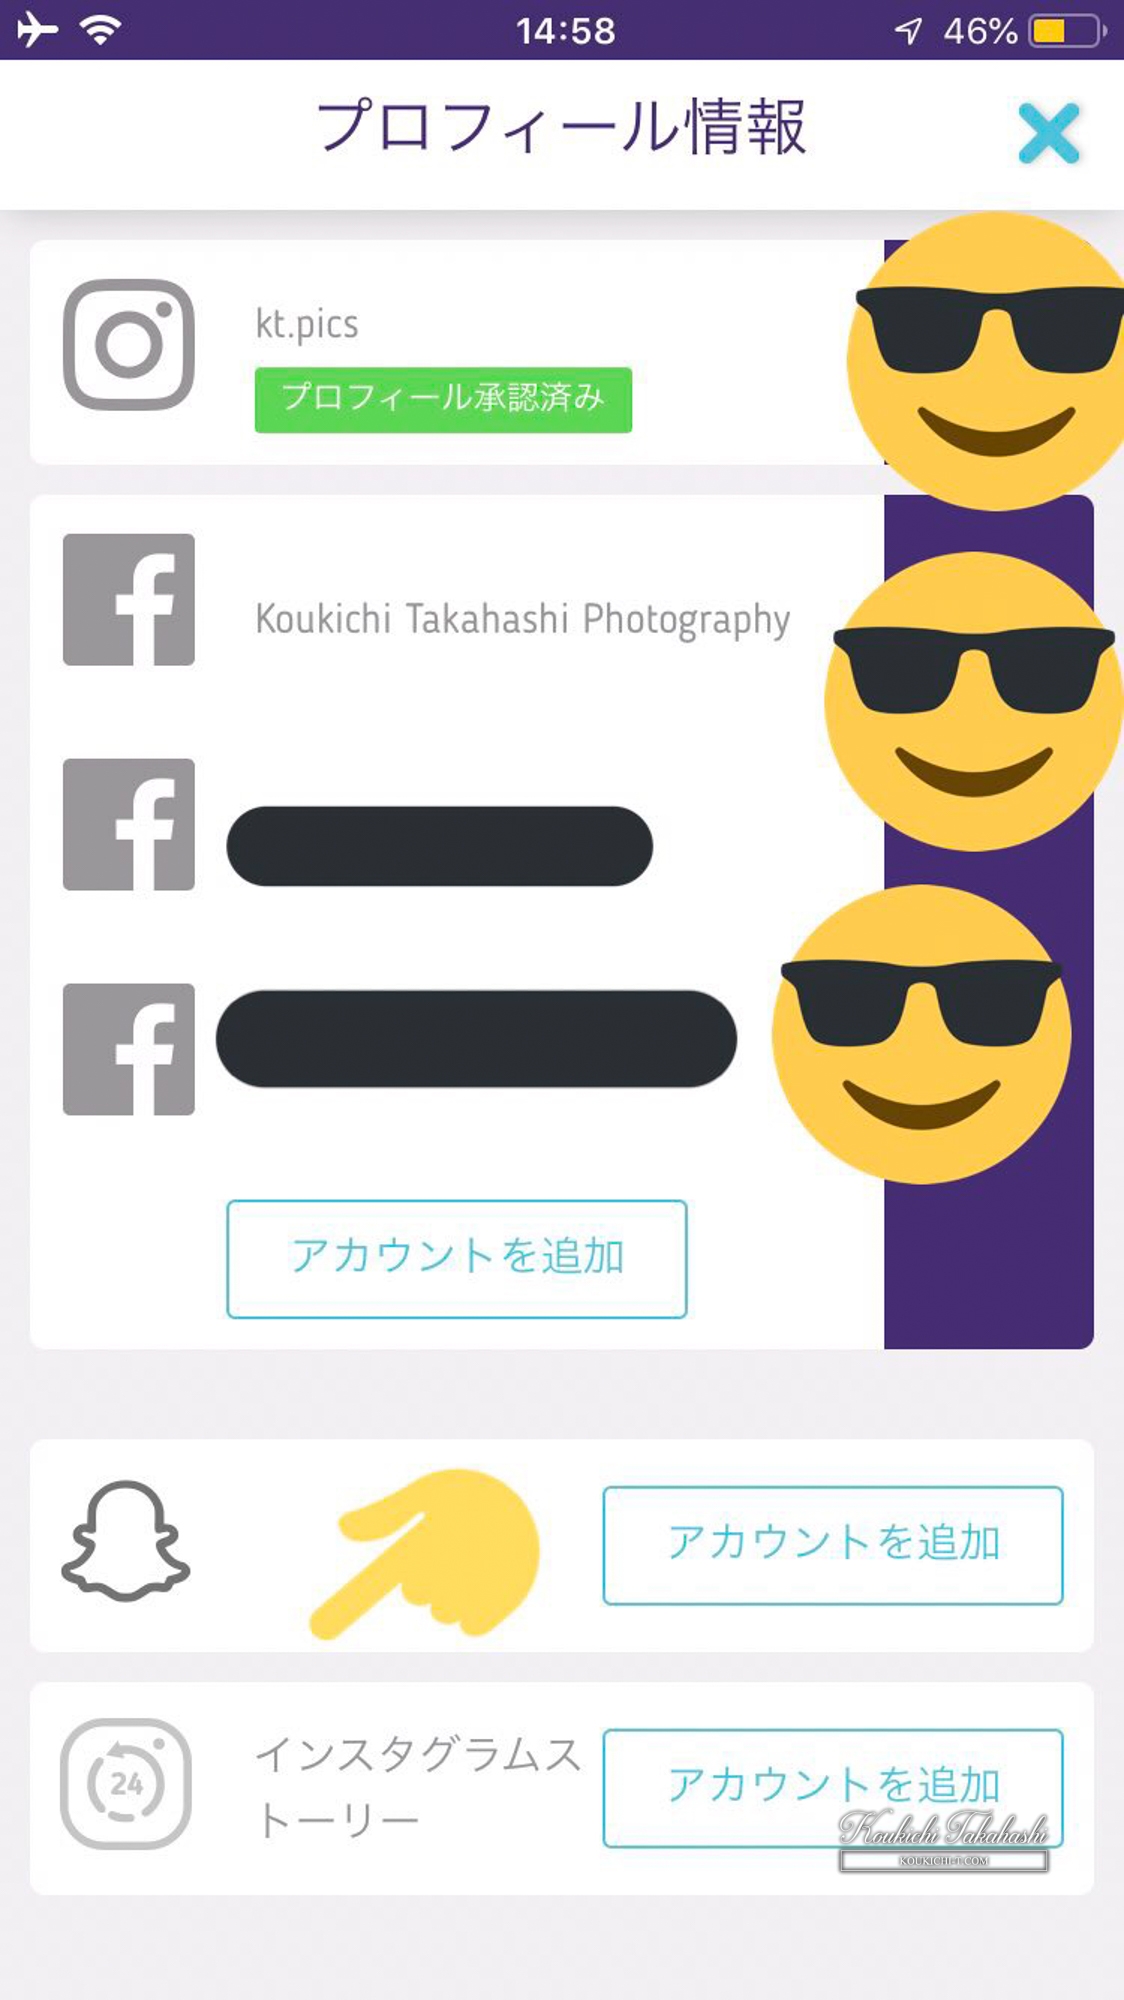 Indahash rolling out “connect Instagram stories”!You can earn videos on your Instagram stories!Indahash/Instagram new feature latest news 2018